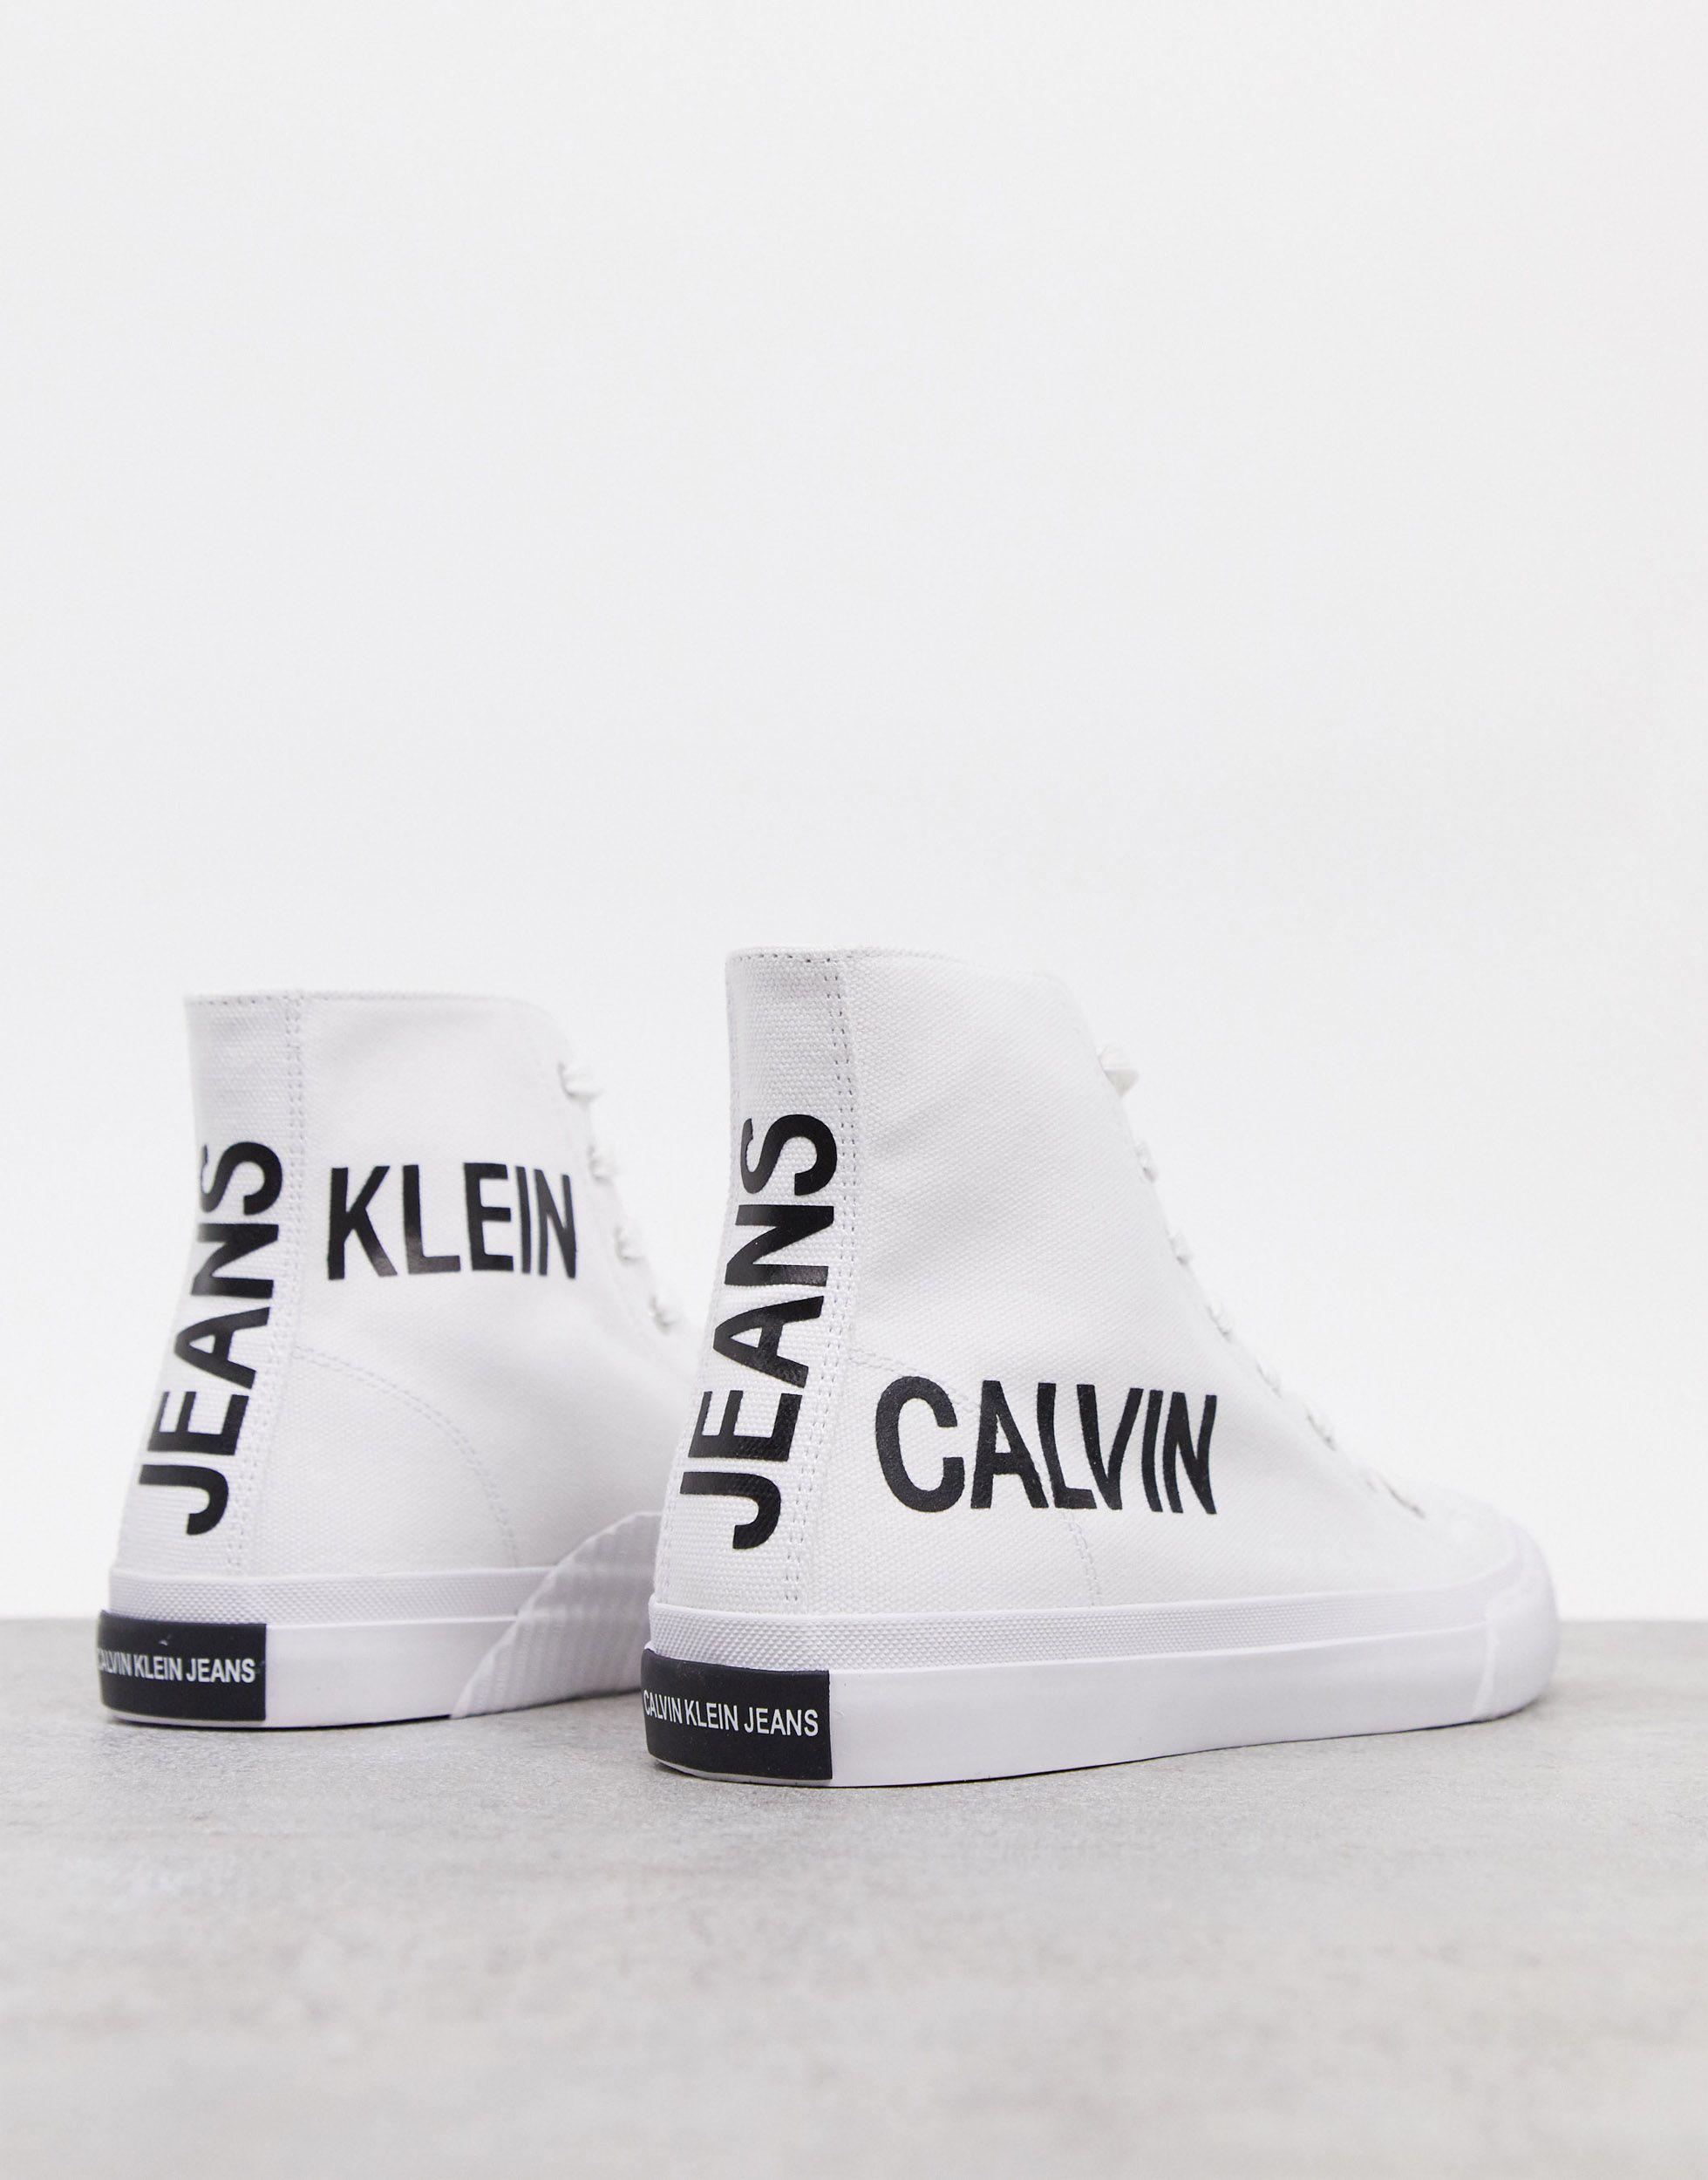 Calvin Klein Jeans Iacopo Canvas High Top Sneakers in White for Men - Lyst